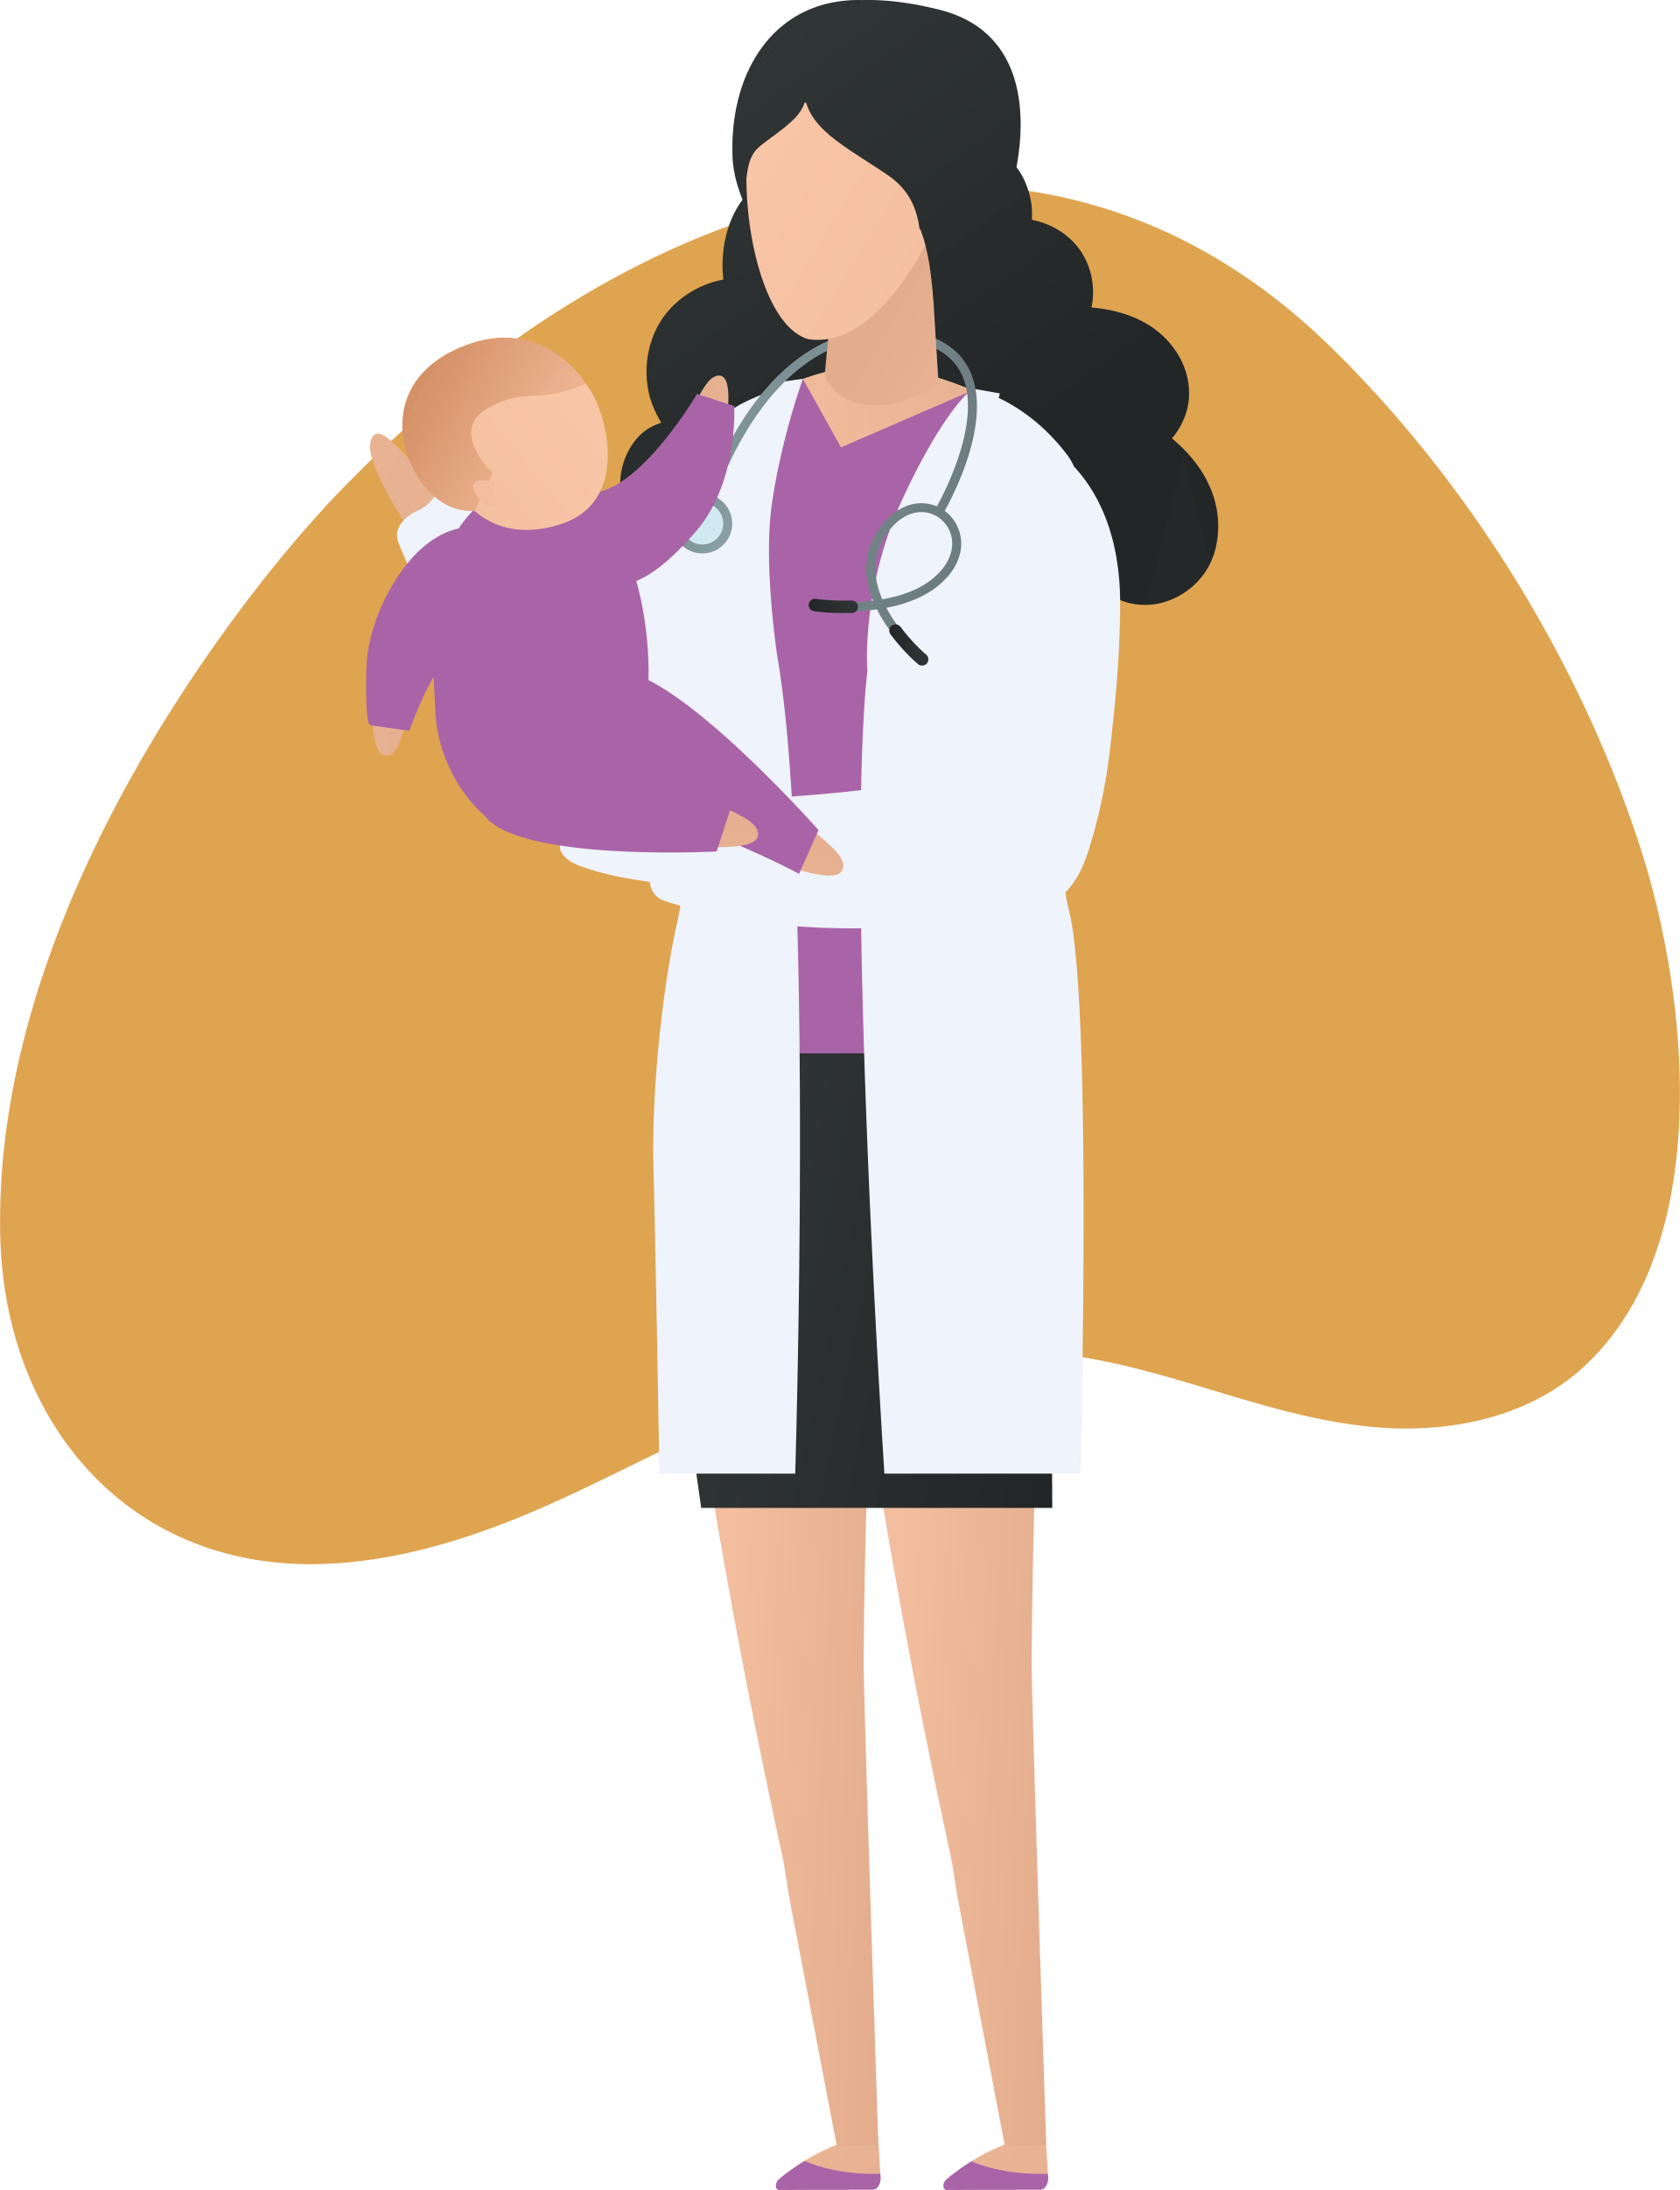 doctor and baby illustration